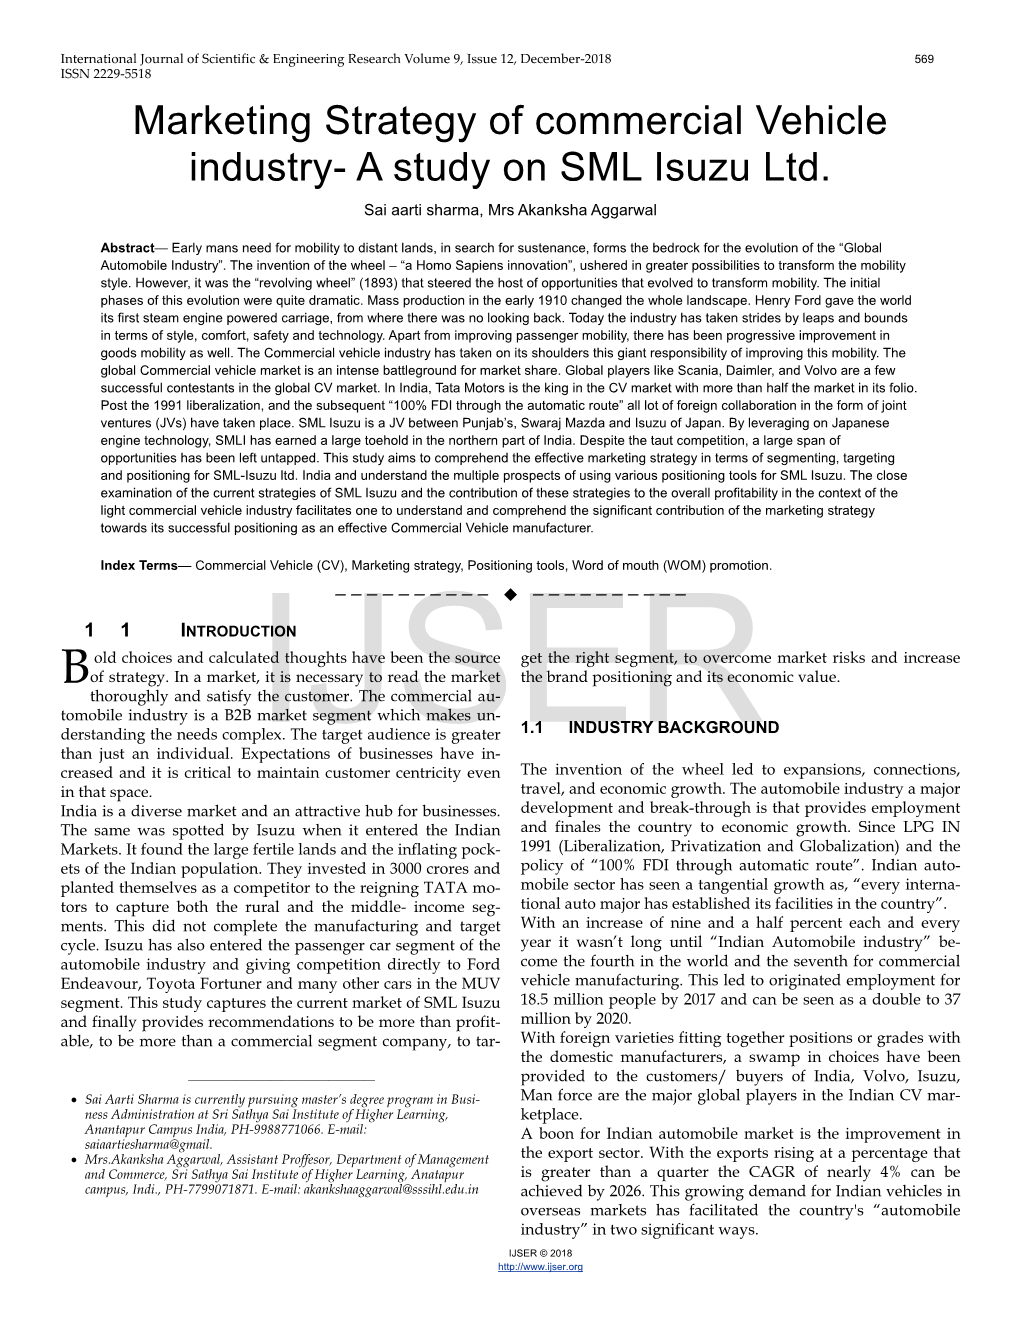 Marketing Strategy of Commercial Vehicle Industry- a Study on SML Isuzu Ltd